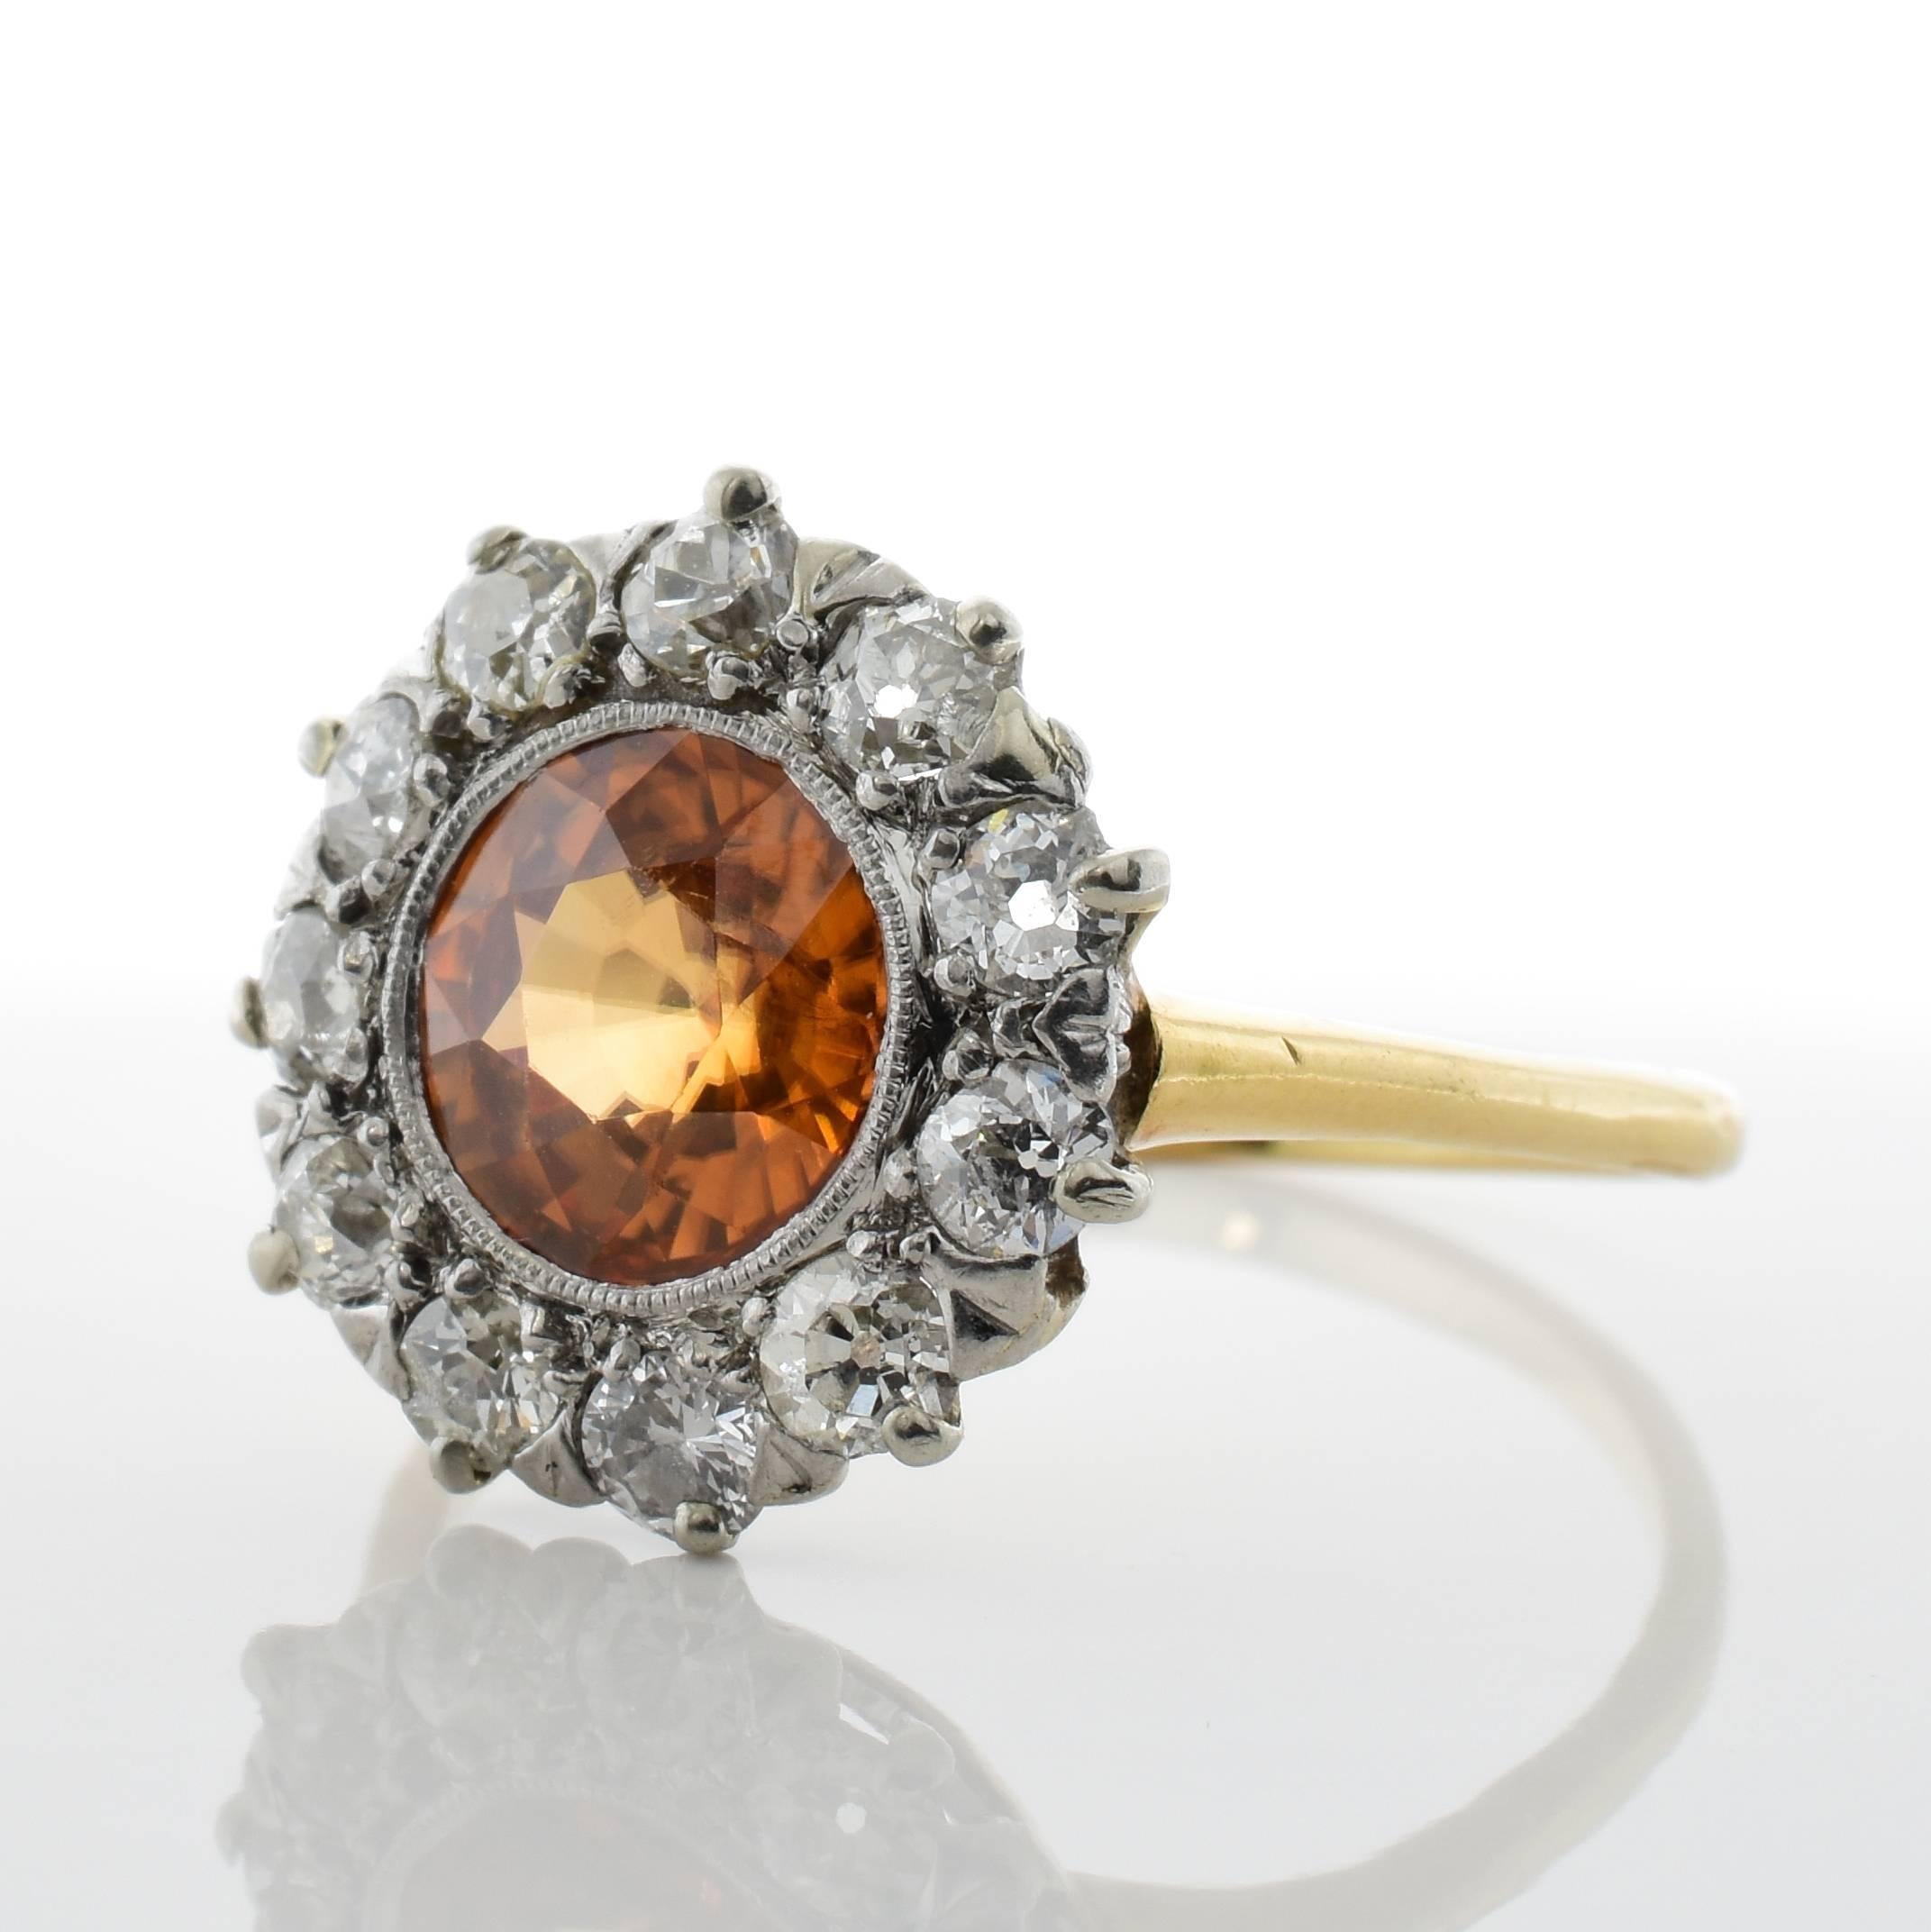 This antique ring features a 1.82 carat zircon center stone, surrounded by 1.50 carats of Old European cut diamonds, which are set in 14k yellow gold. 